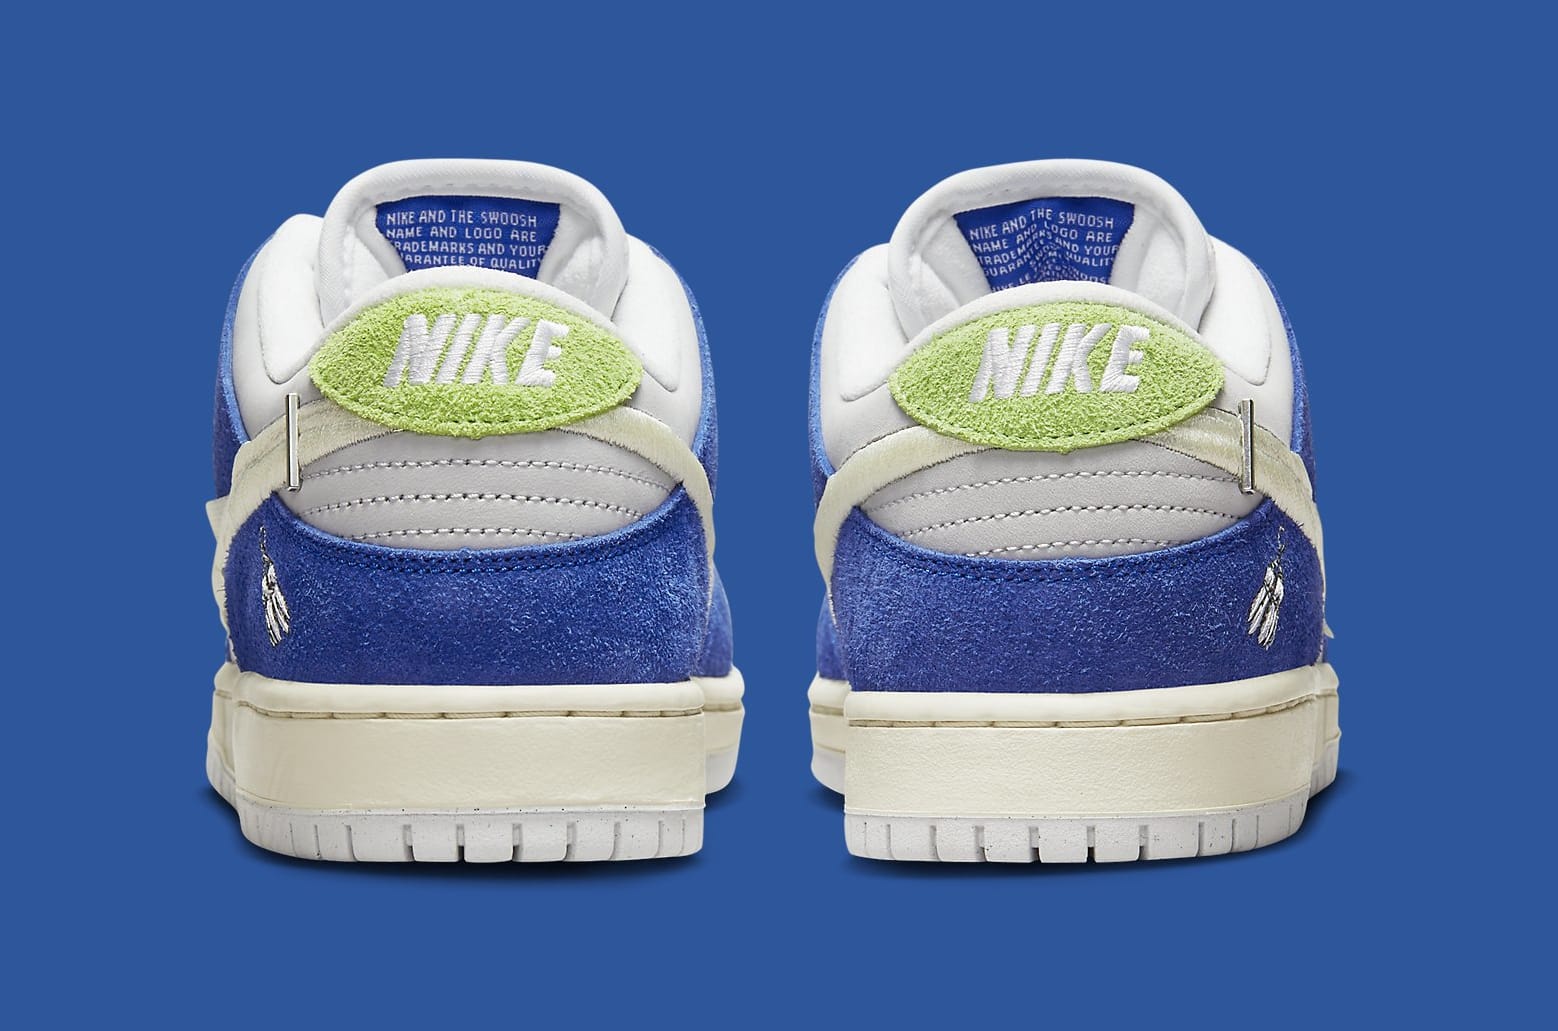 Fly Streetwear's Nike SB Dunk Collab Drops This Month | Complex